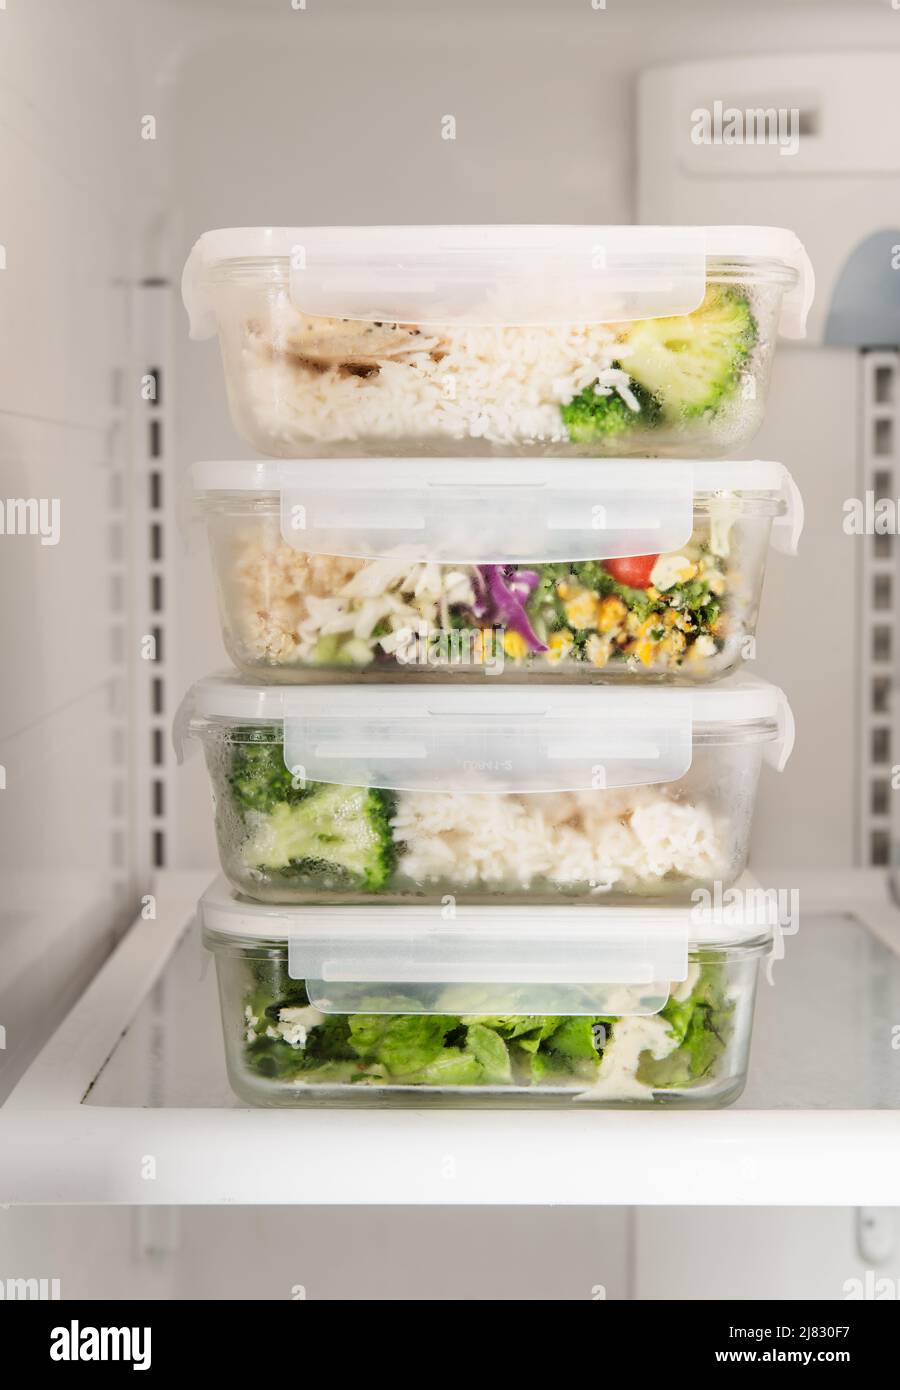 Meals/food prep containers sitting in the fridge Stock Photo